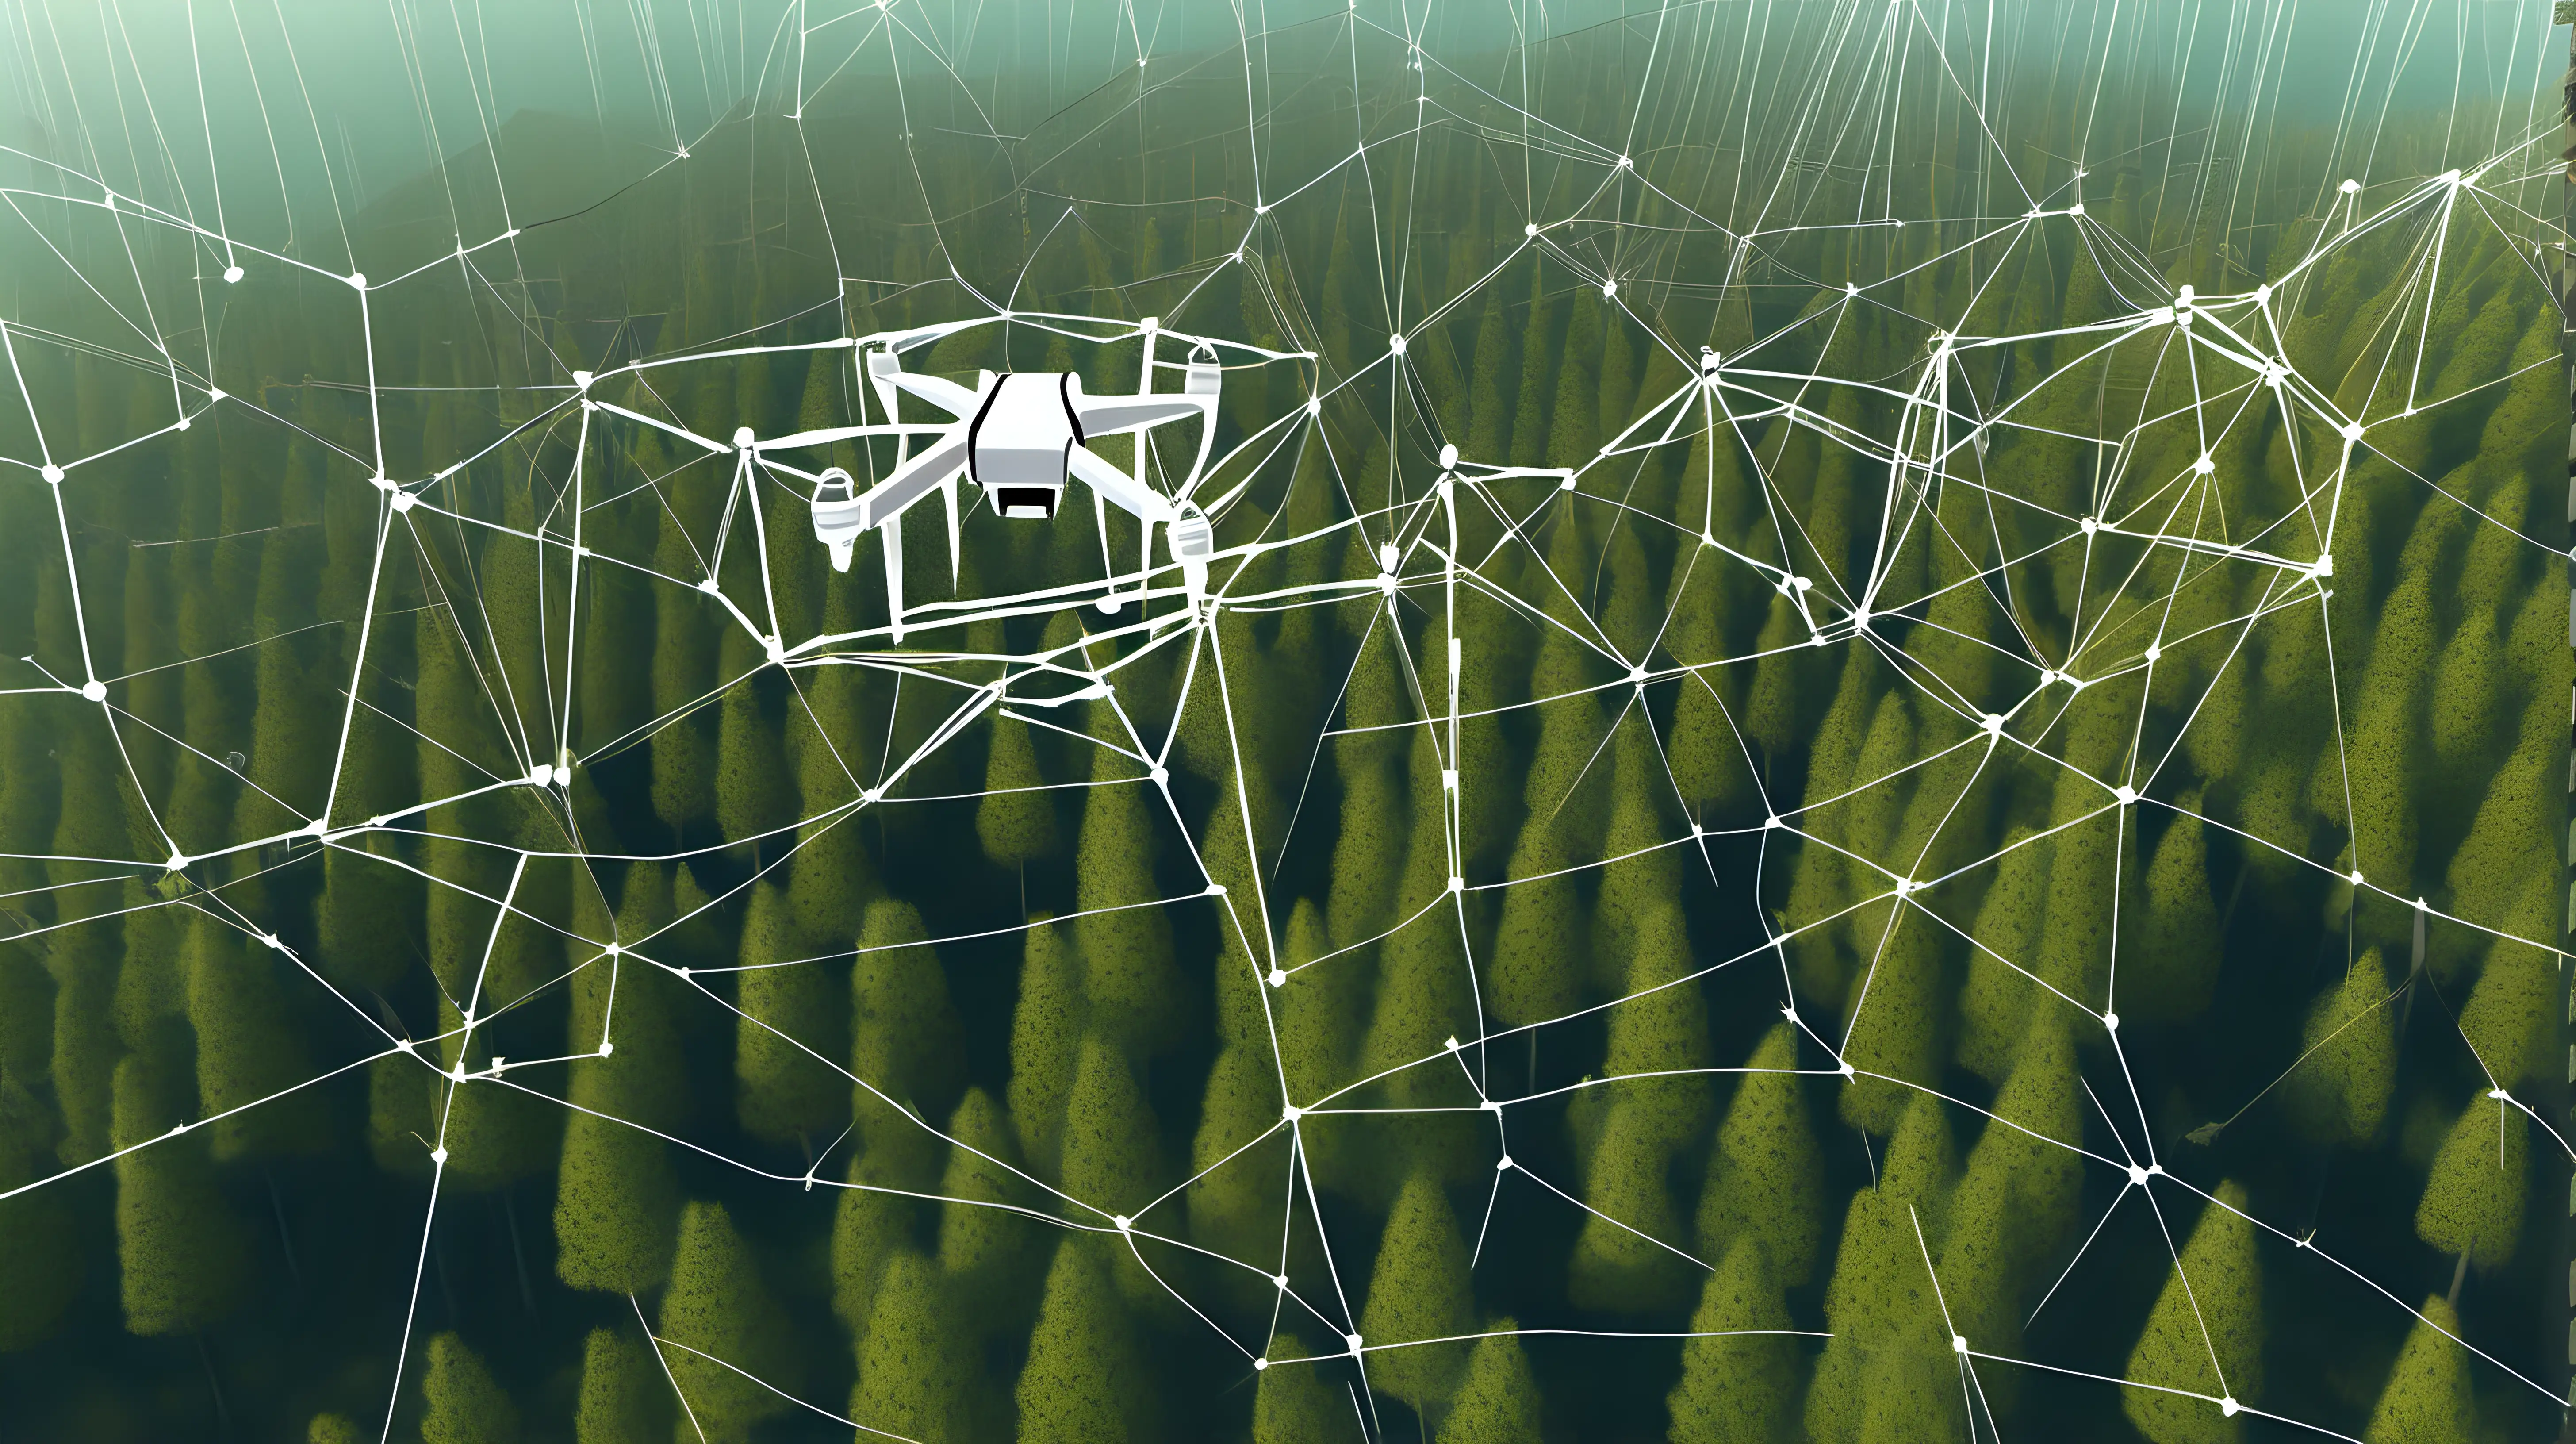 Draw a drone in the image flying over to inspect a segment of power grid network that crosses a pine forest.